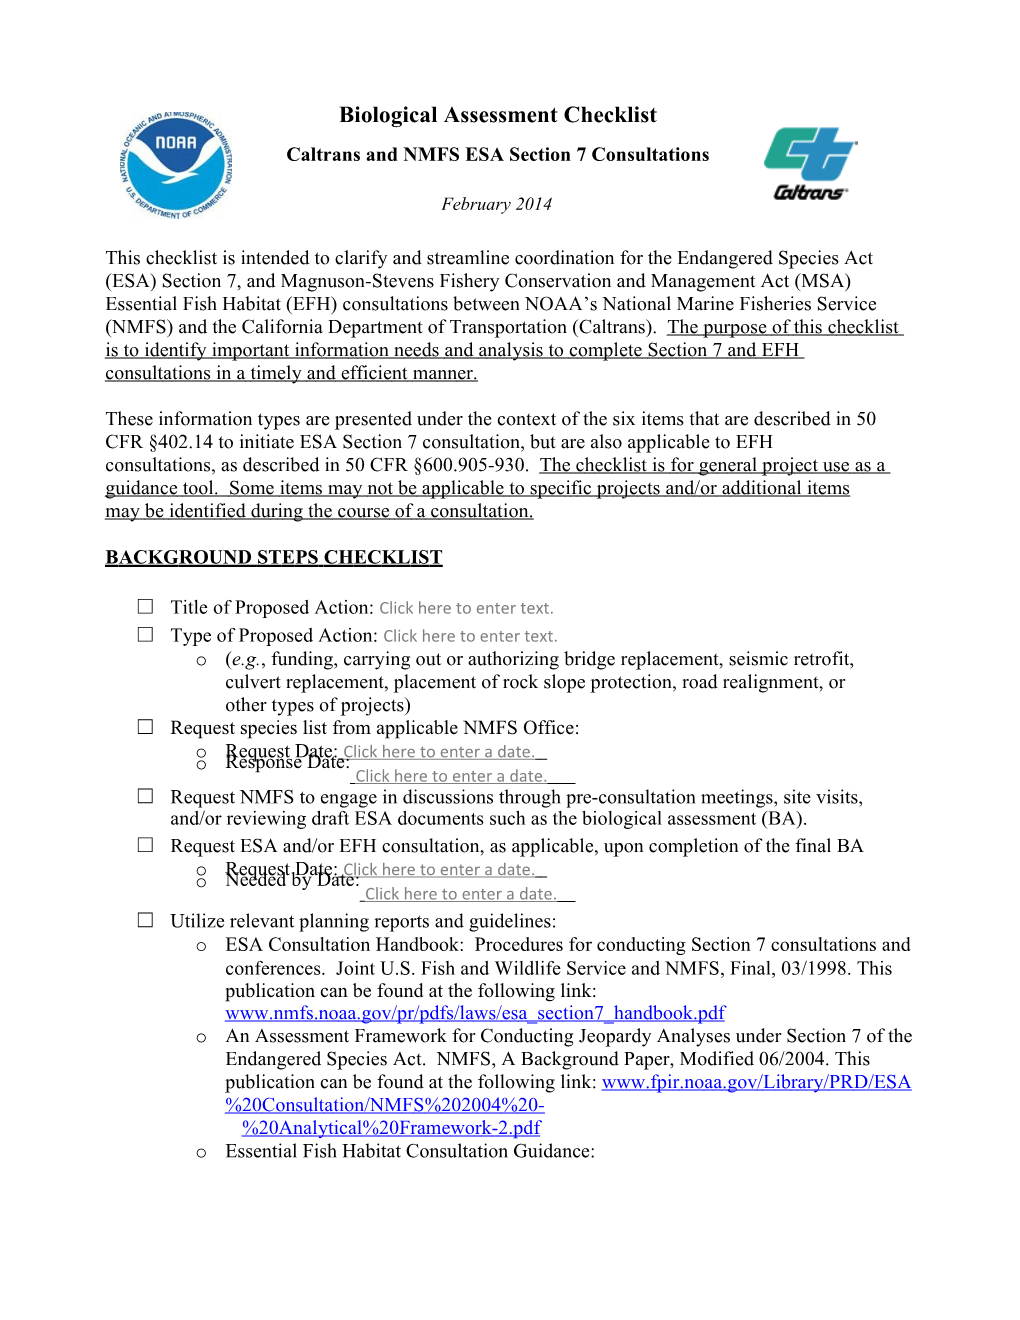 Caltrans Andnmfs ESA Section7 Consultations